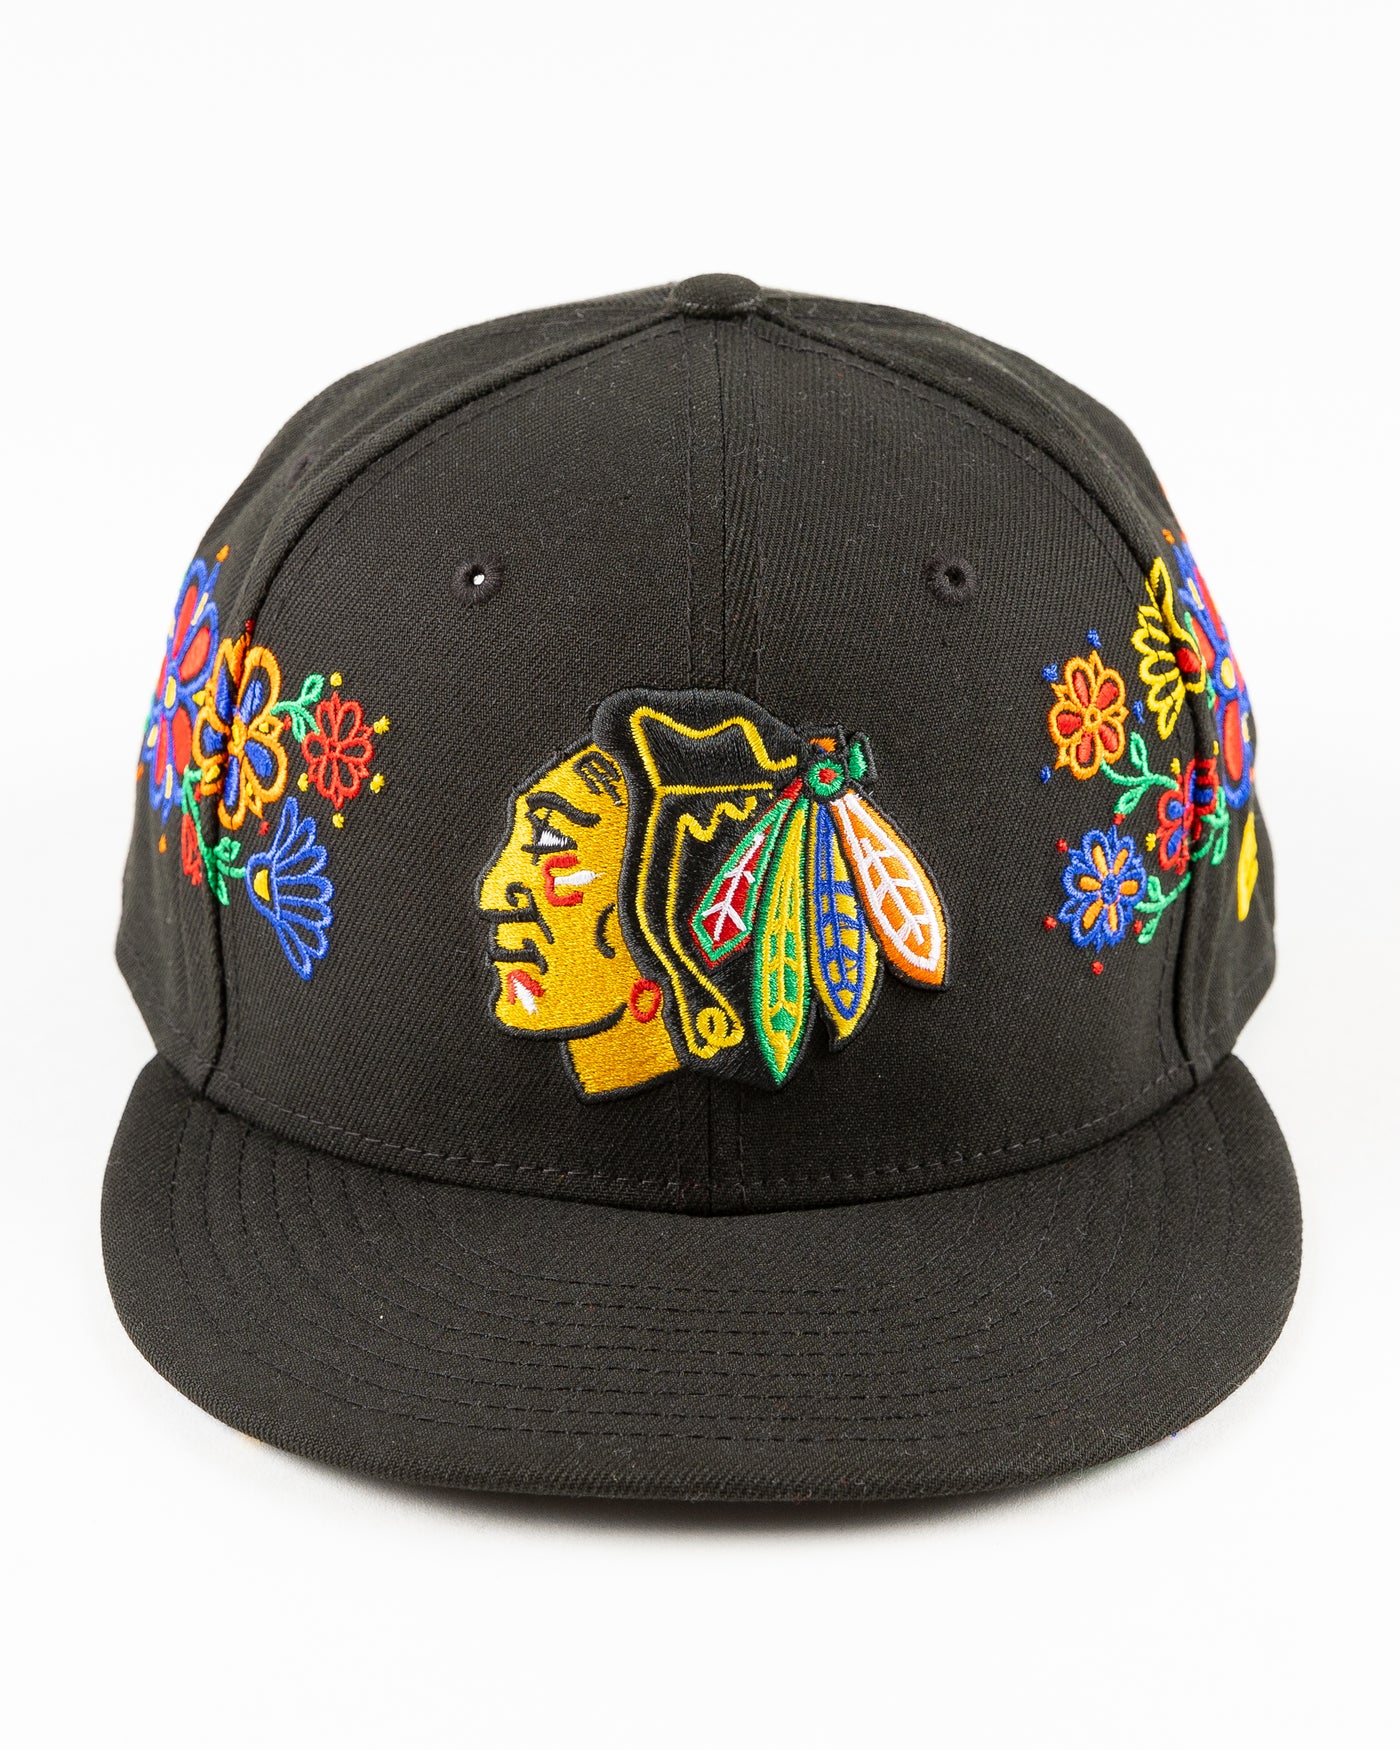 black New Era snapback with Chicago Blackhawks primary logo surrounded by floral pattern - front lay flat